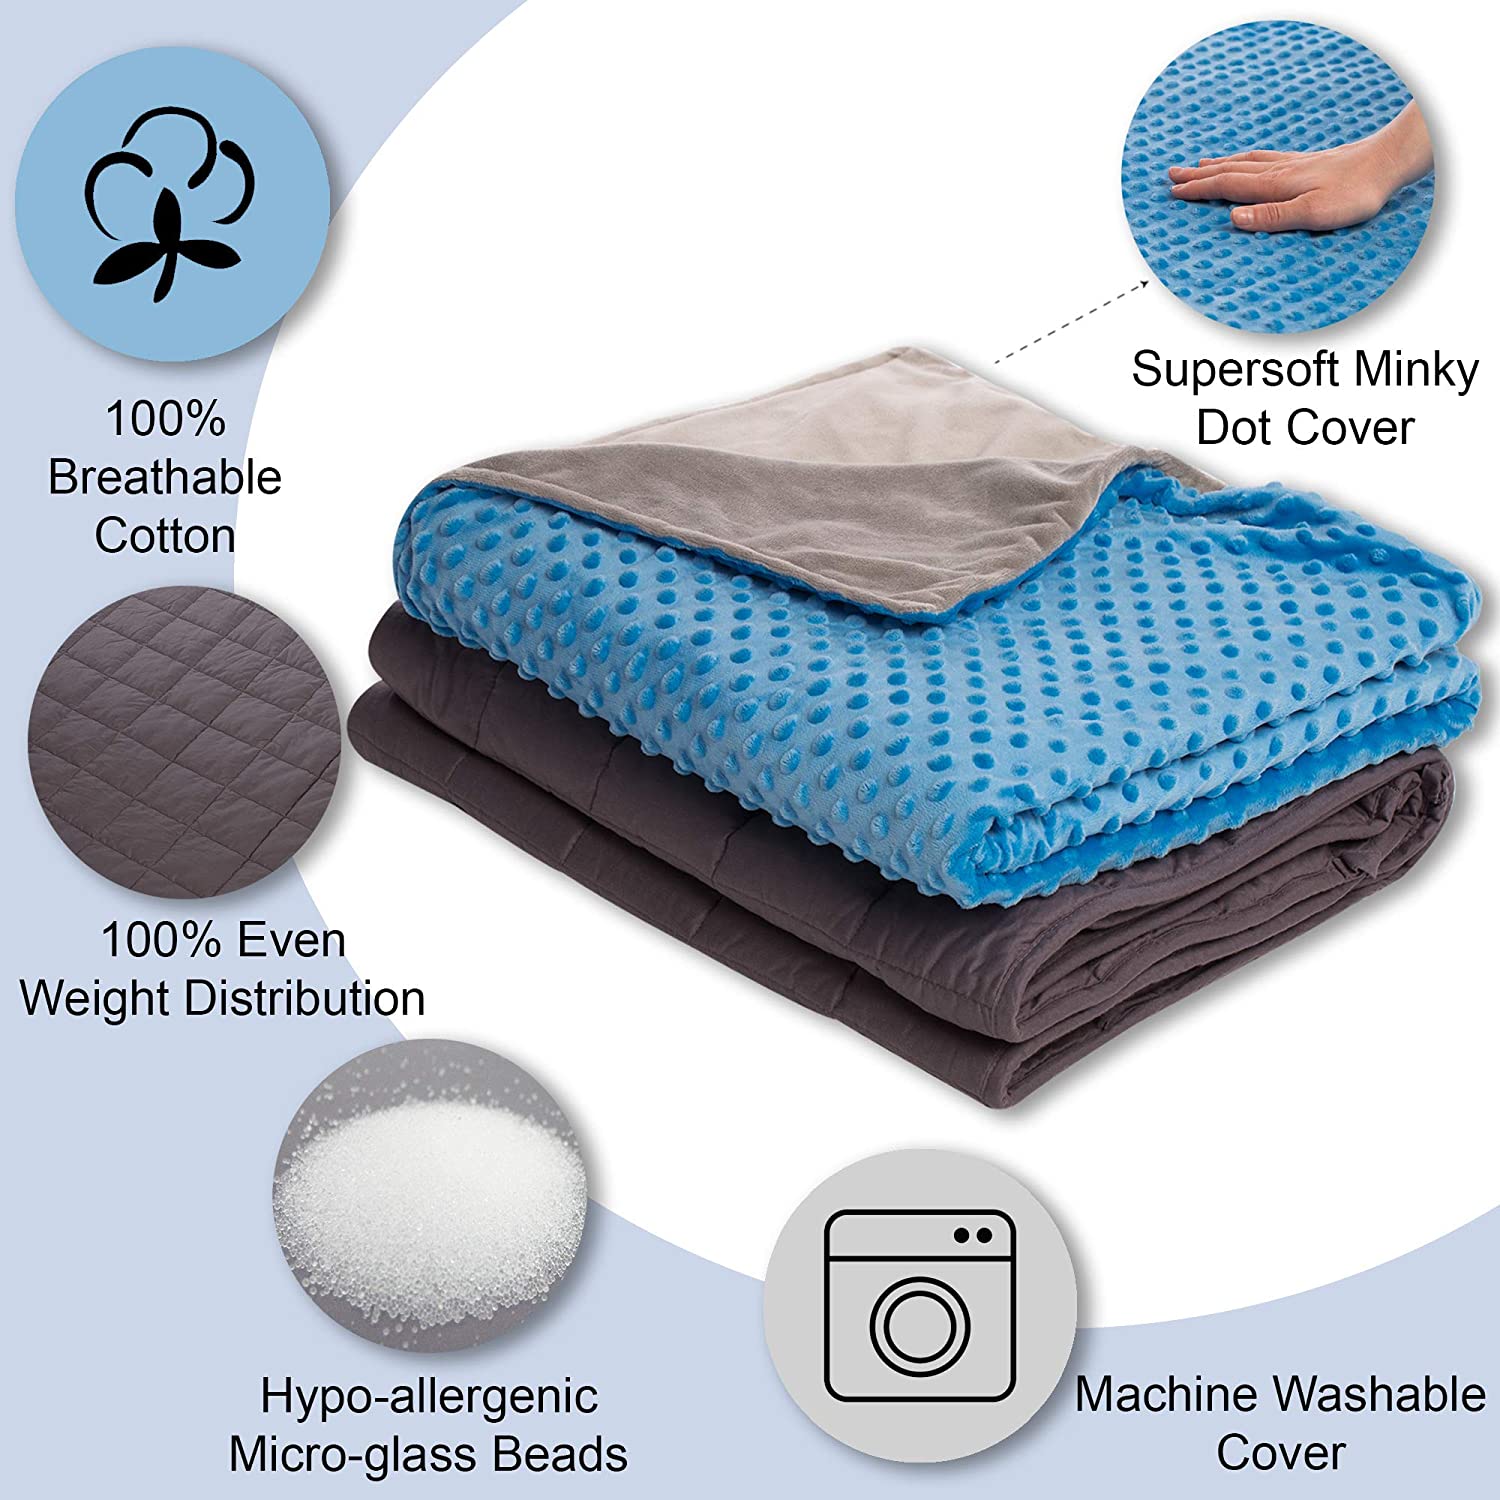 Super Soft 12 lbs Weighted Blanket for Adult with Removable Cover - 48 x 72 inch Weighted Blankets with Glass Beads Single Size - Heavy Blanket for Adults and Kids - Hazli Collection 